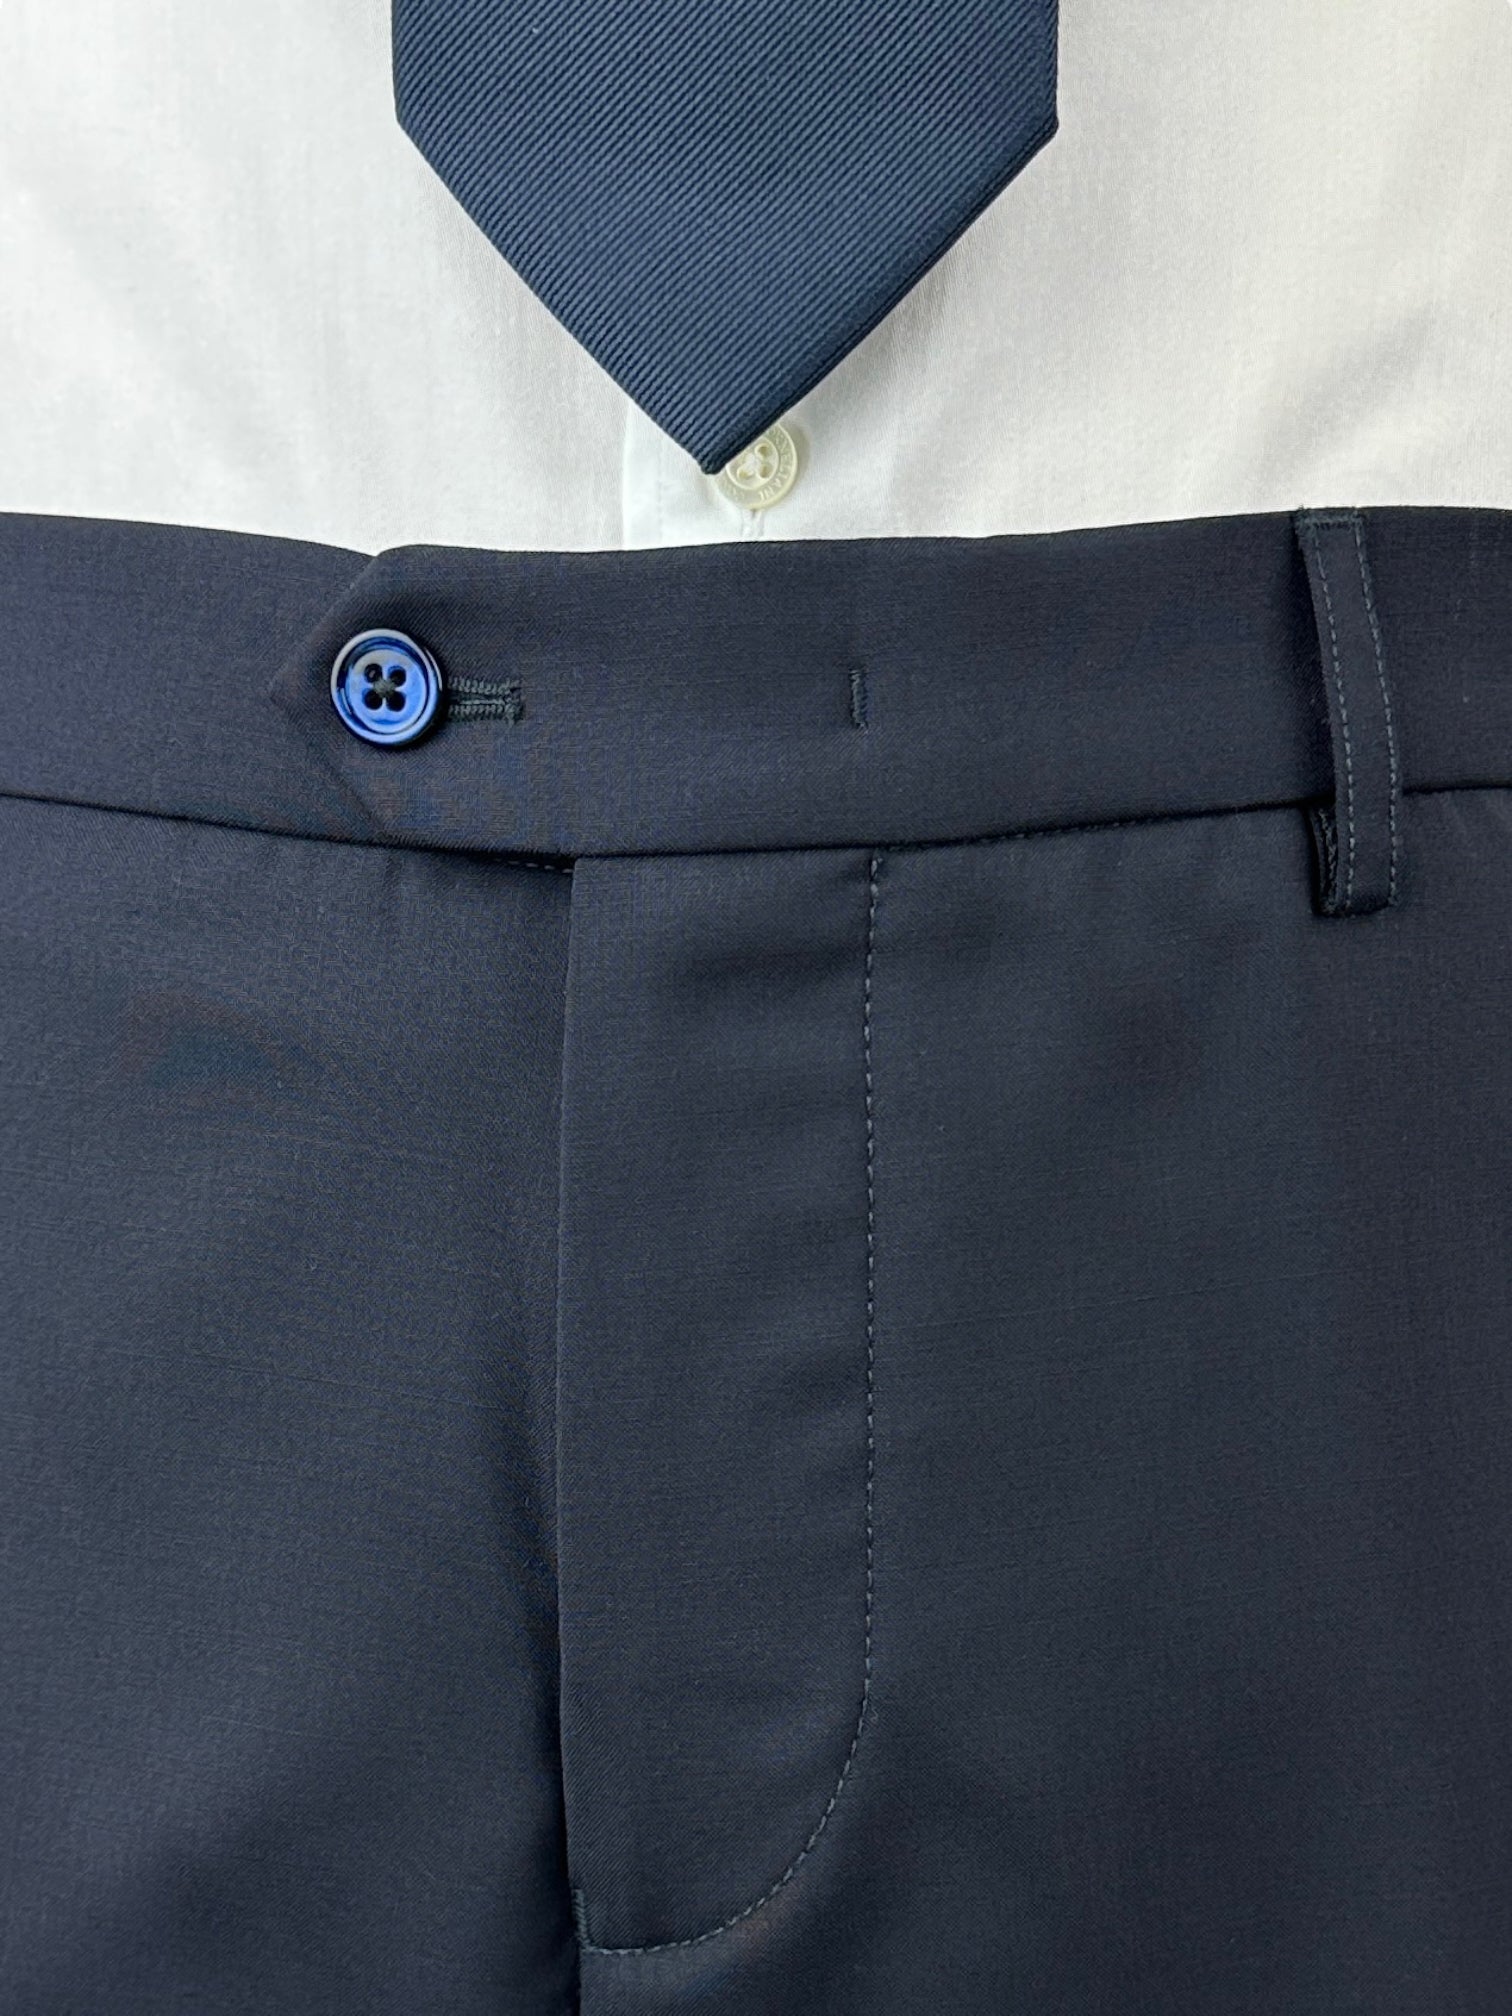 Perscarolo Navy Trousers